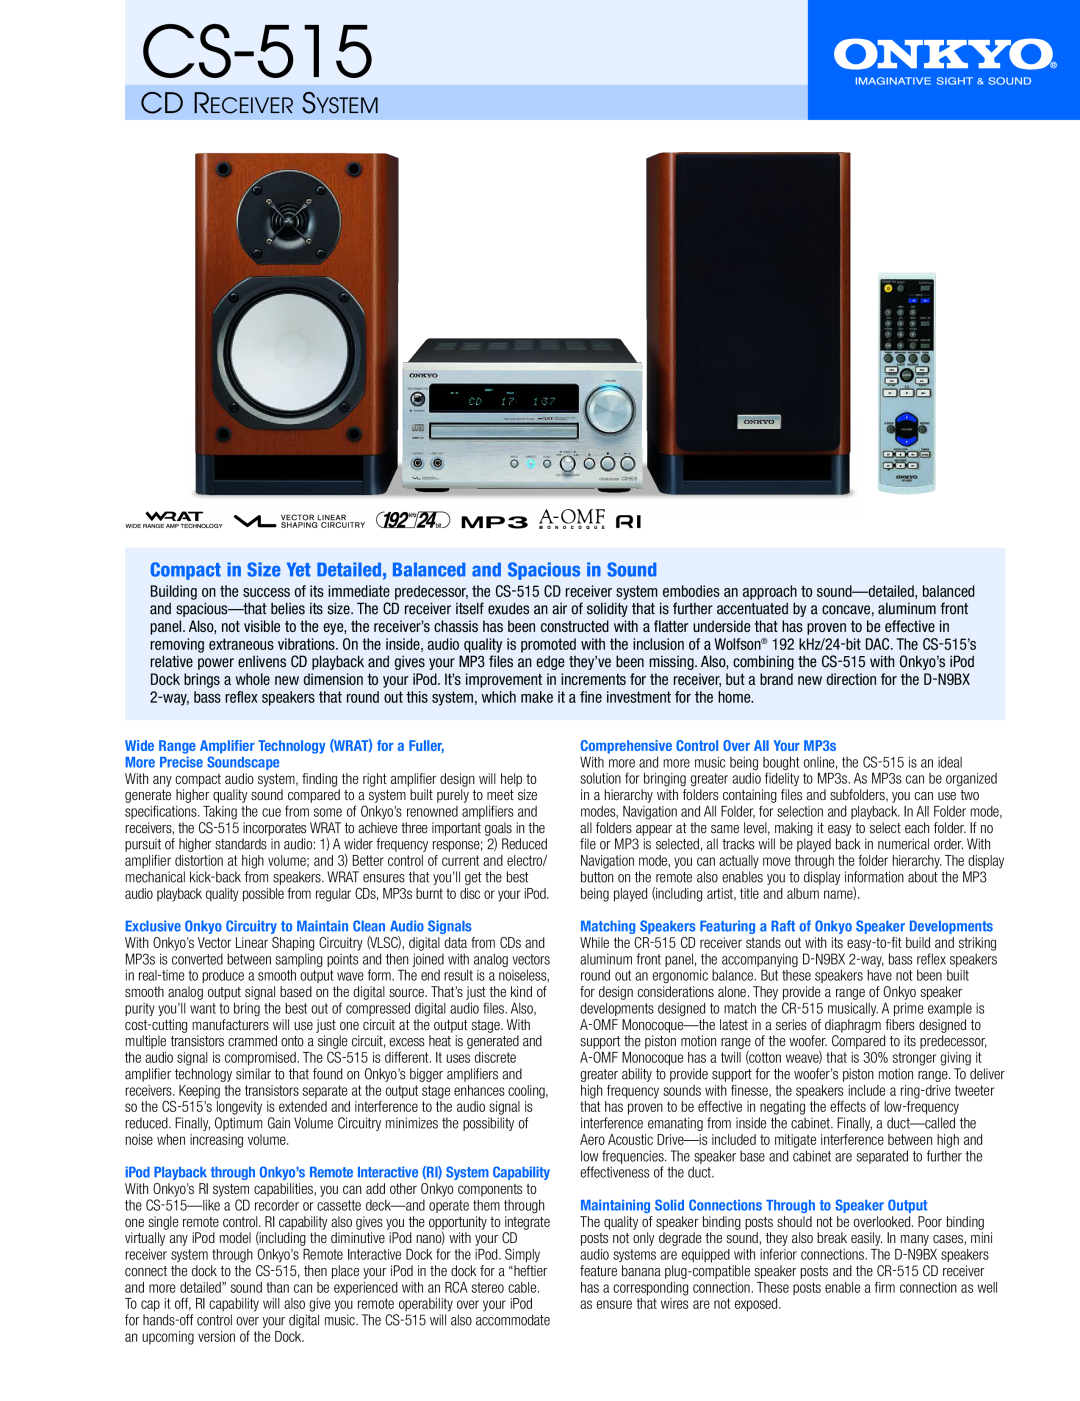 Onkyo CS-515 specifications Cd Receiver System 